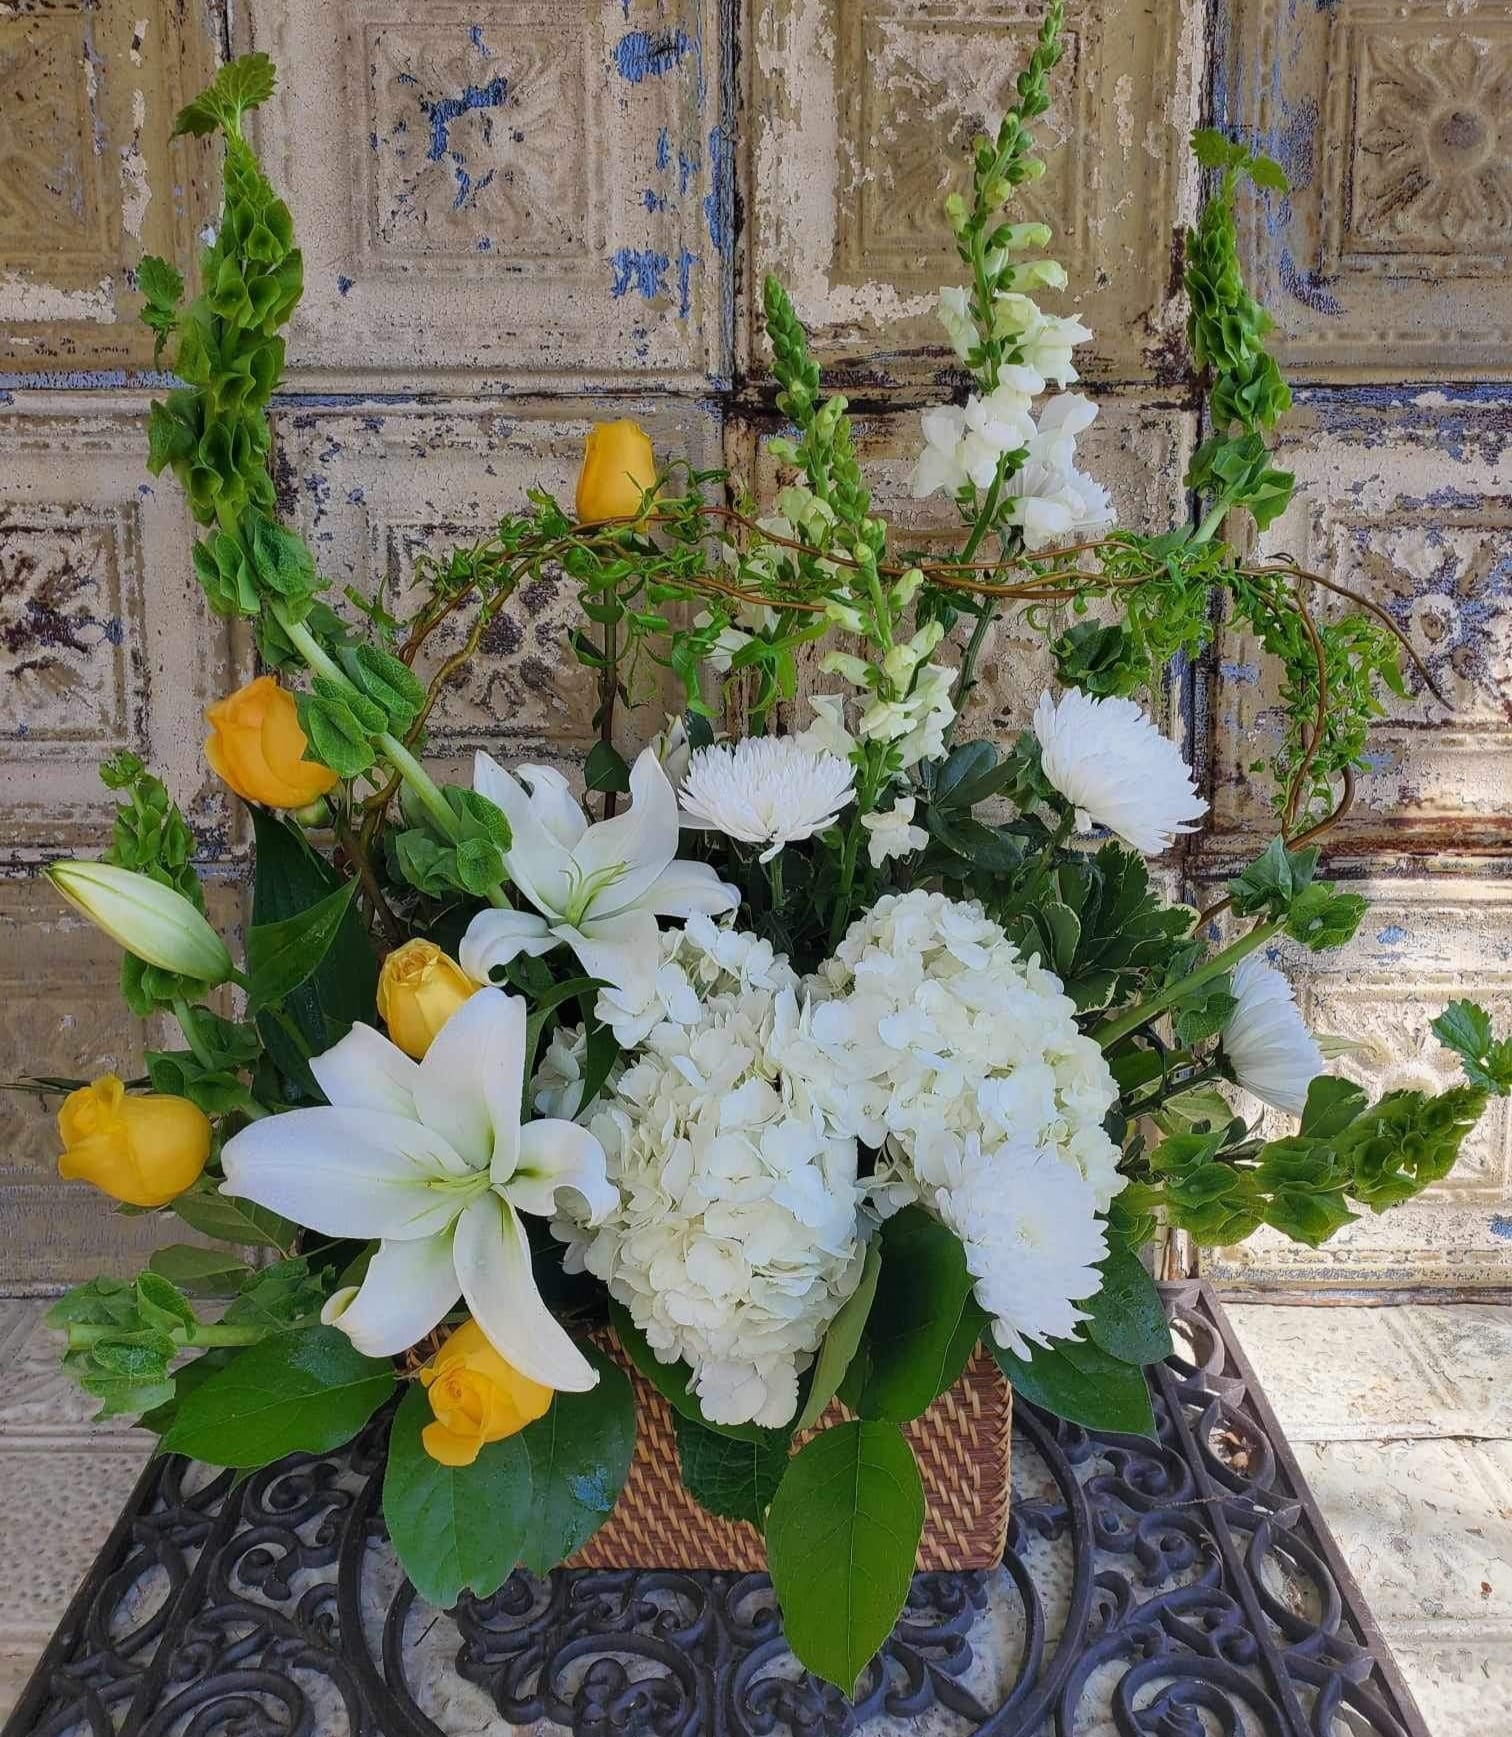 Jean Henry Dunant - A simple mix of curly willow, belles of Ireland, snapdragons, hydrangeas, mums, yellow roses, and lilies picked to compliment each other. 